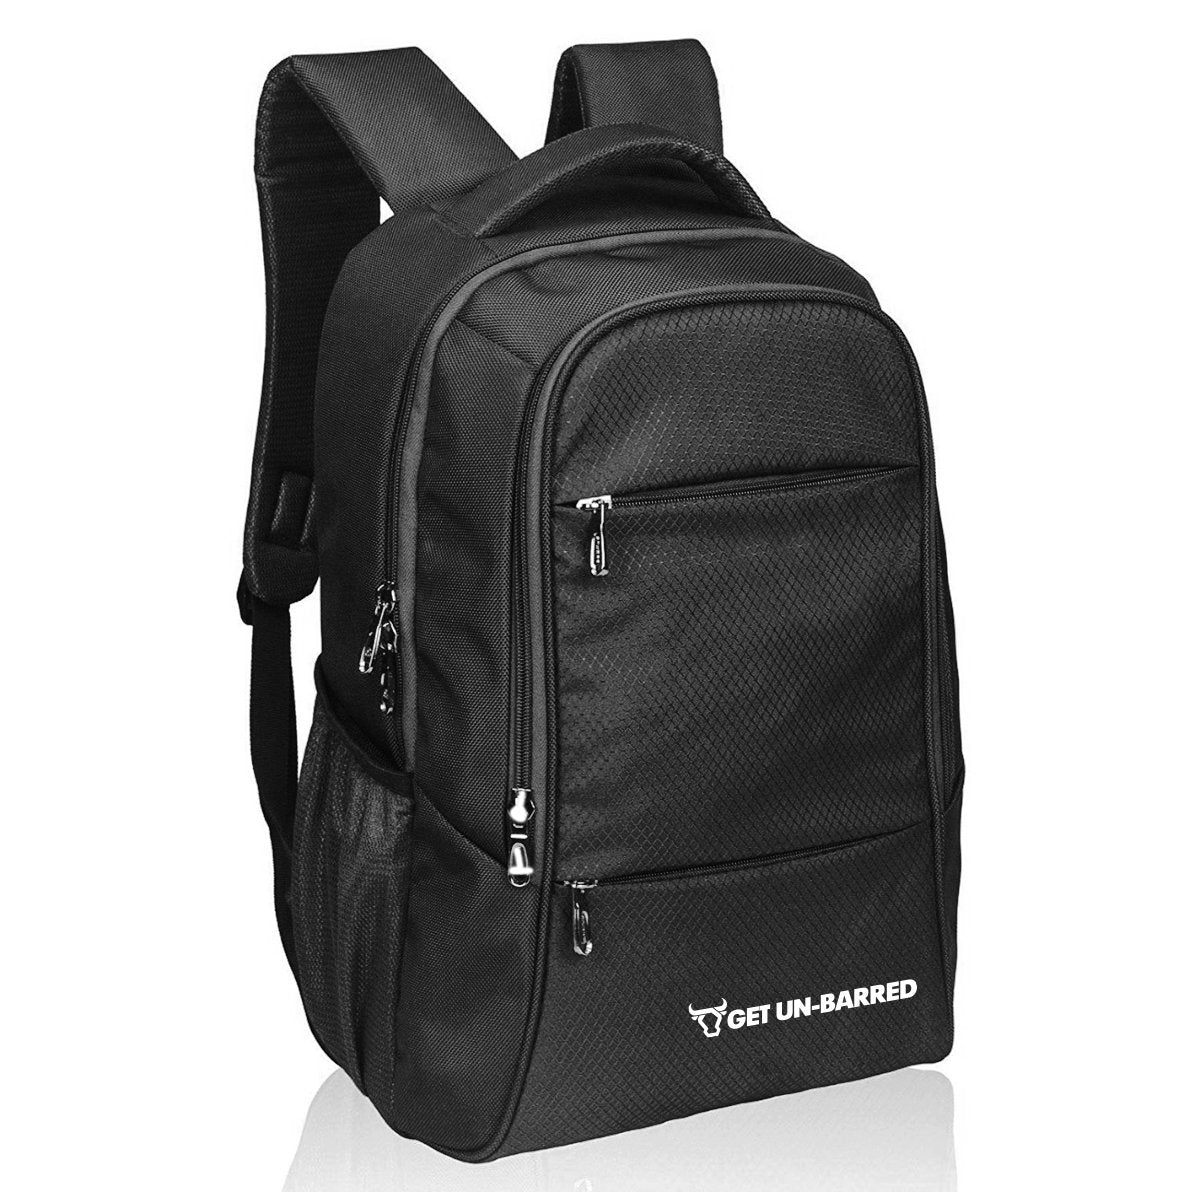 Lexus 40Ltr Laptop Backpack Upto 15.6 Inches - Black